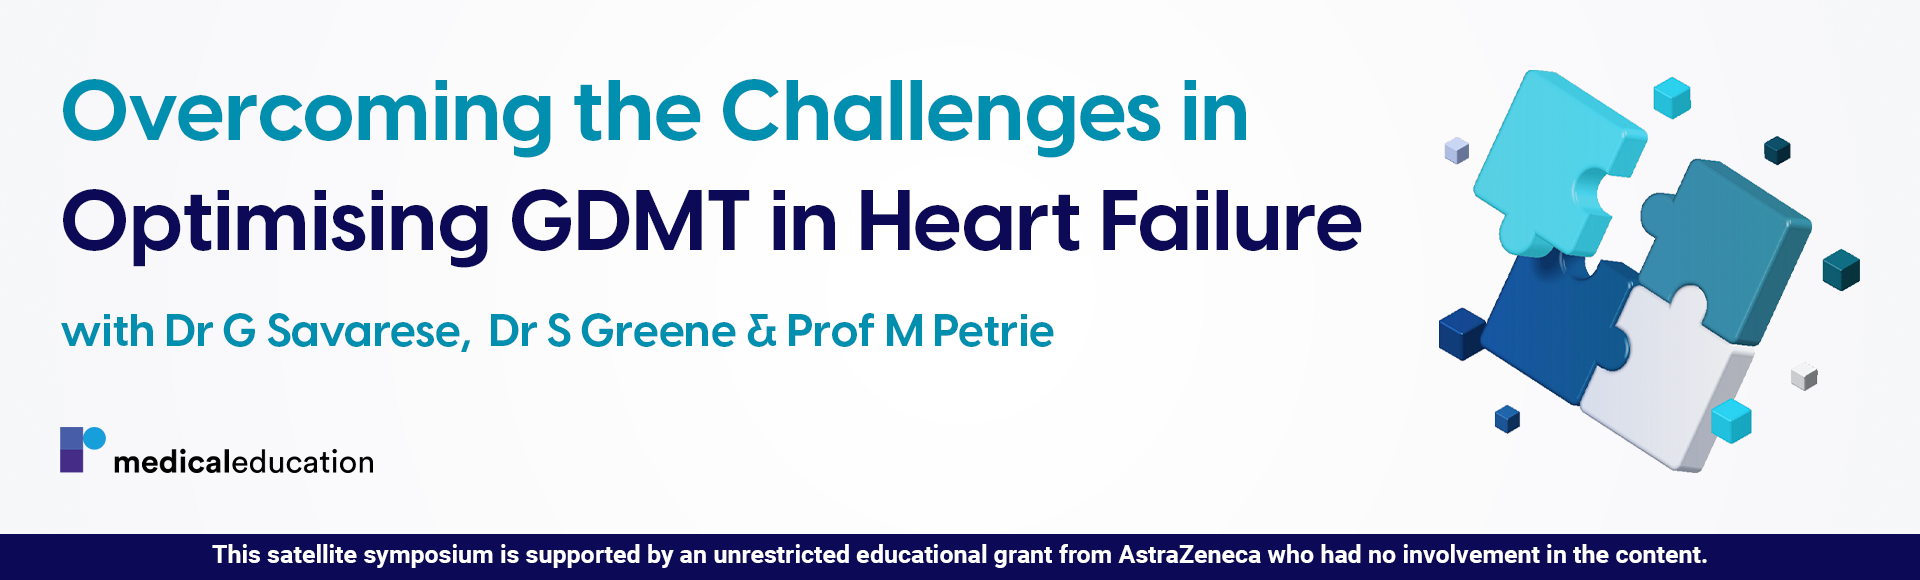 Overcoming the Challenges in Optimising GDMT in HF